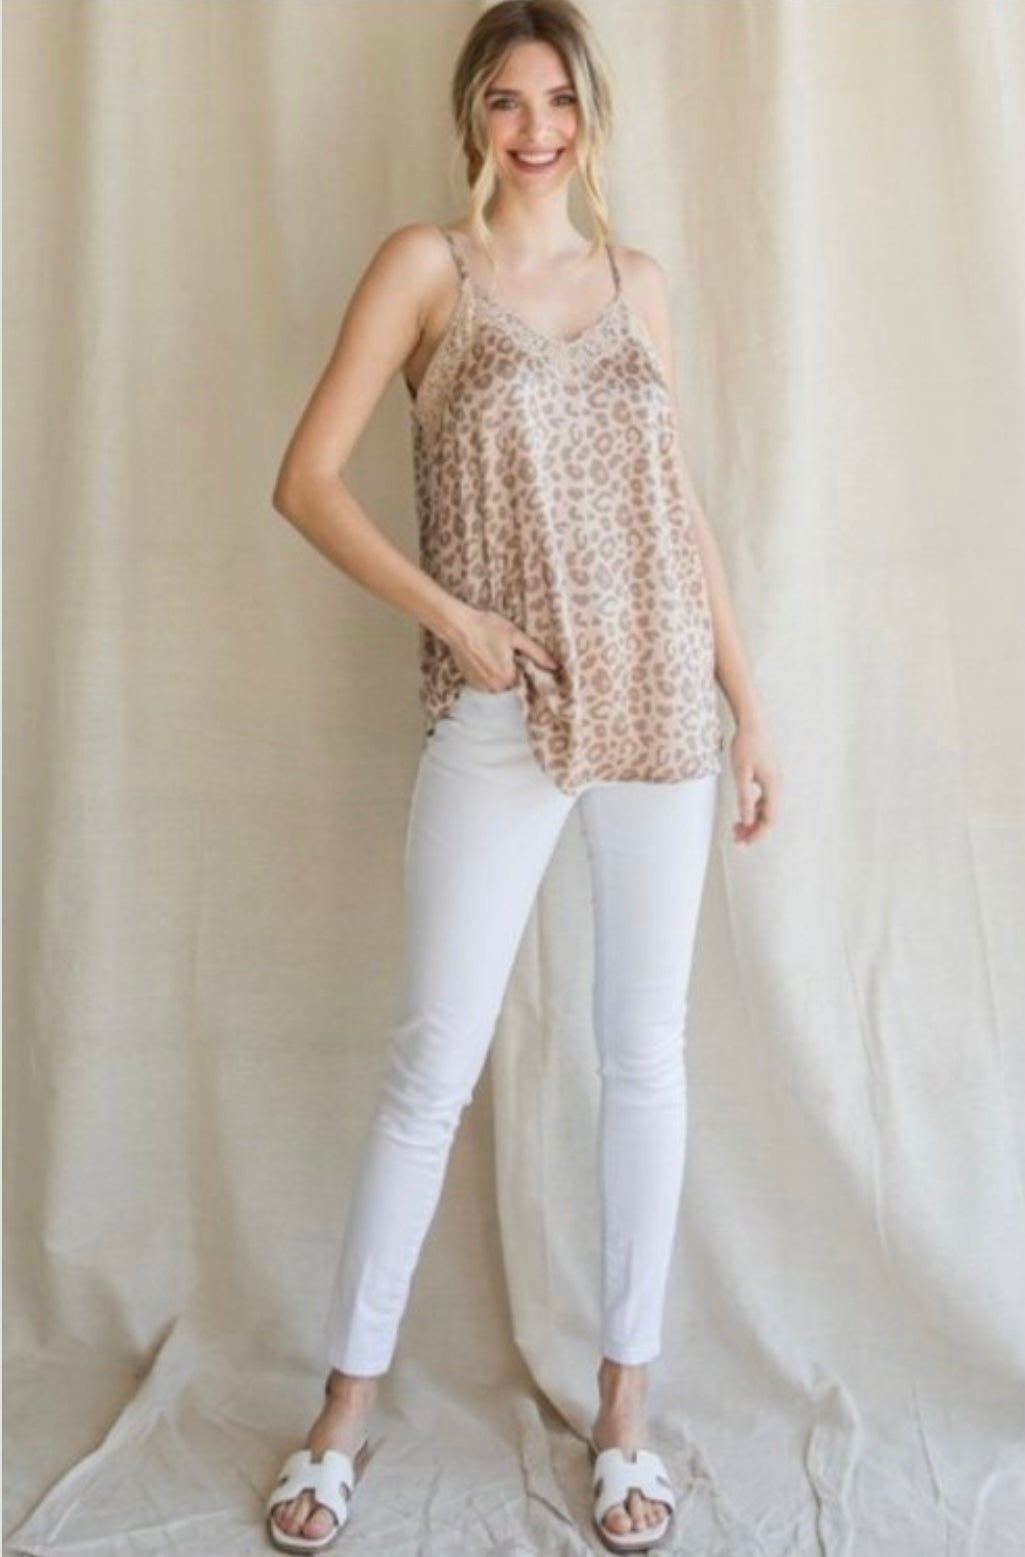 Vanessa Animal Print Cami - Corinne Boutique Family Owned and Operated USA